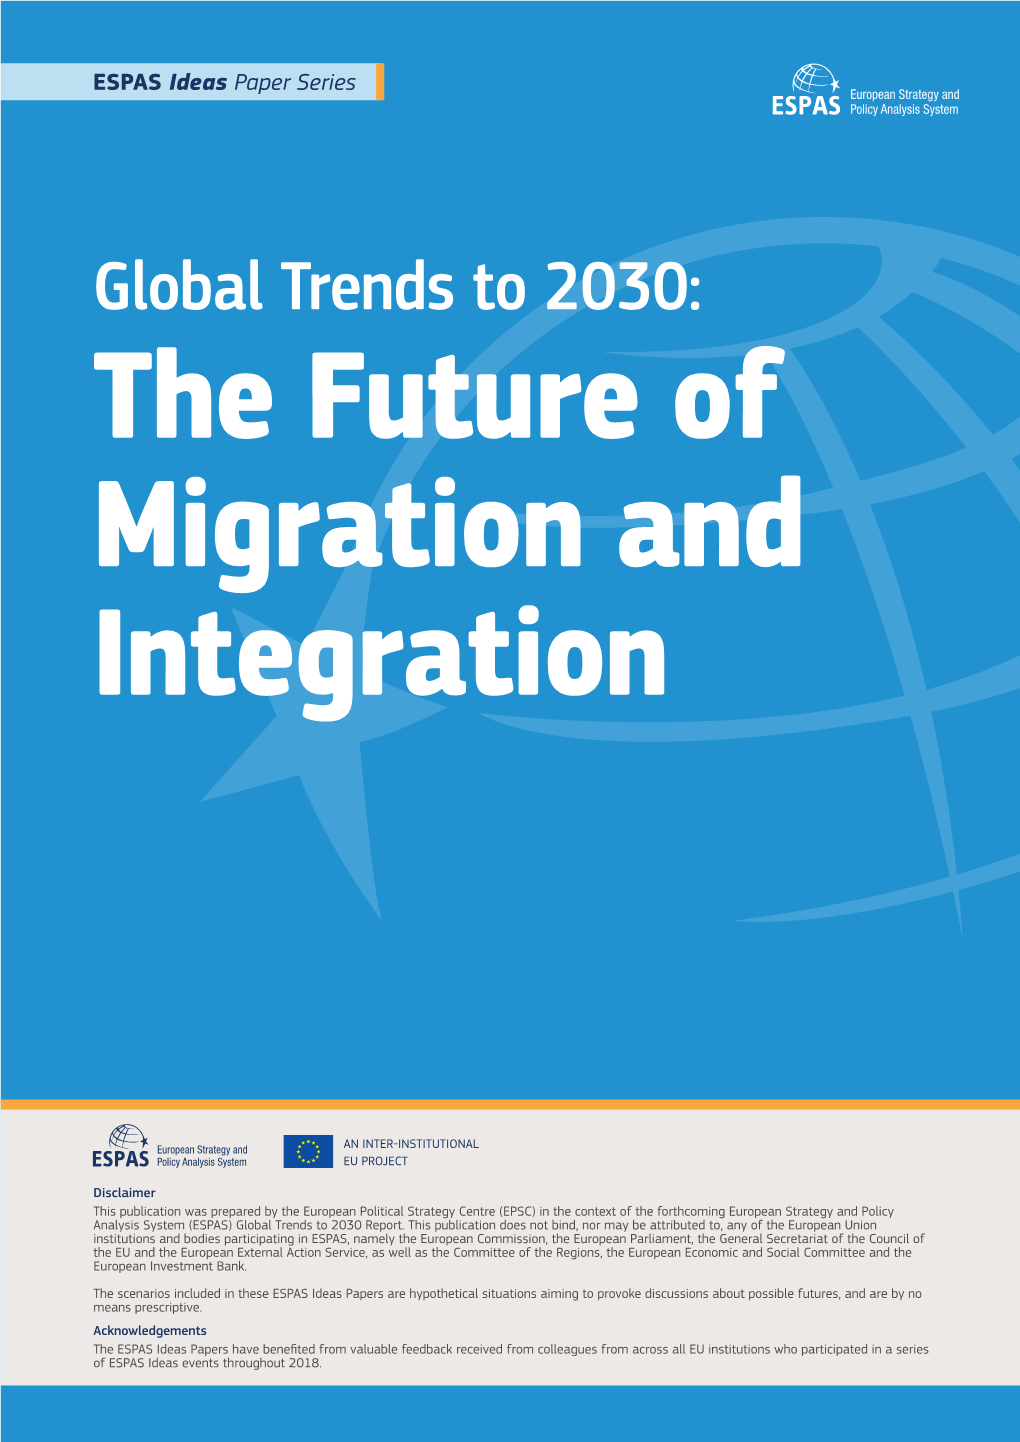 Global Trends to 2030: the Future of Migration and Integration